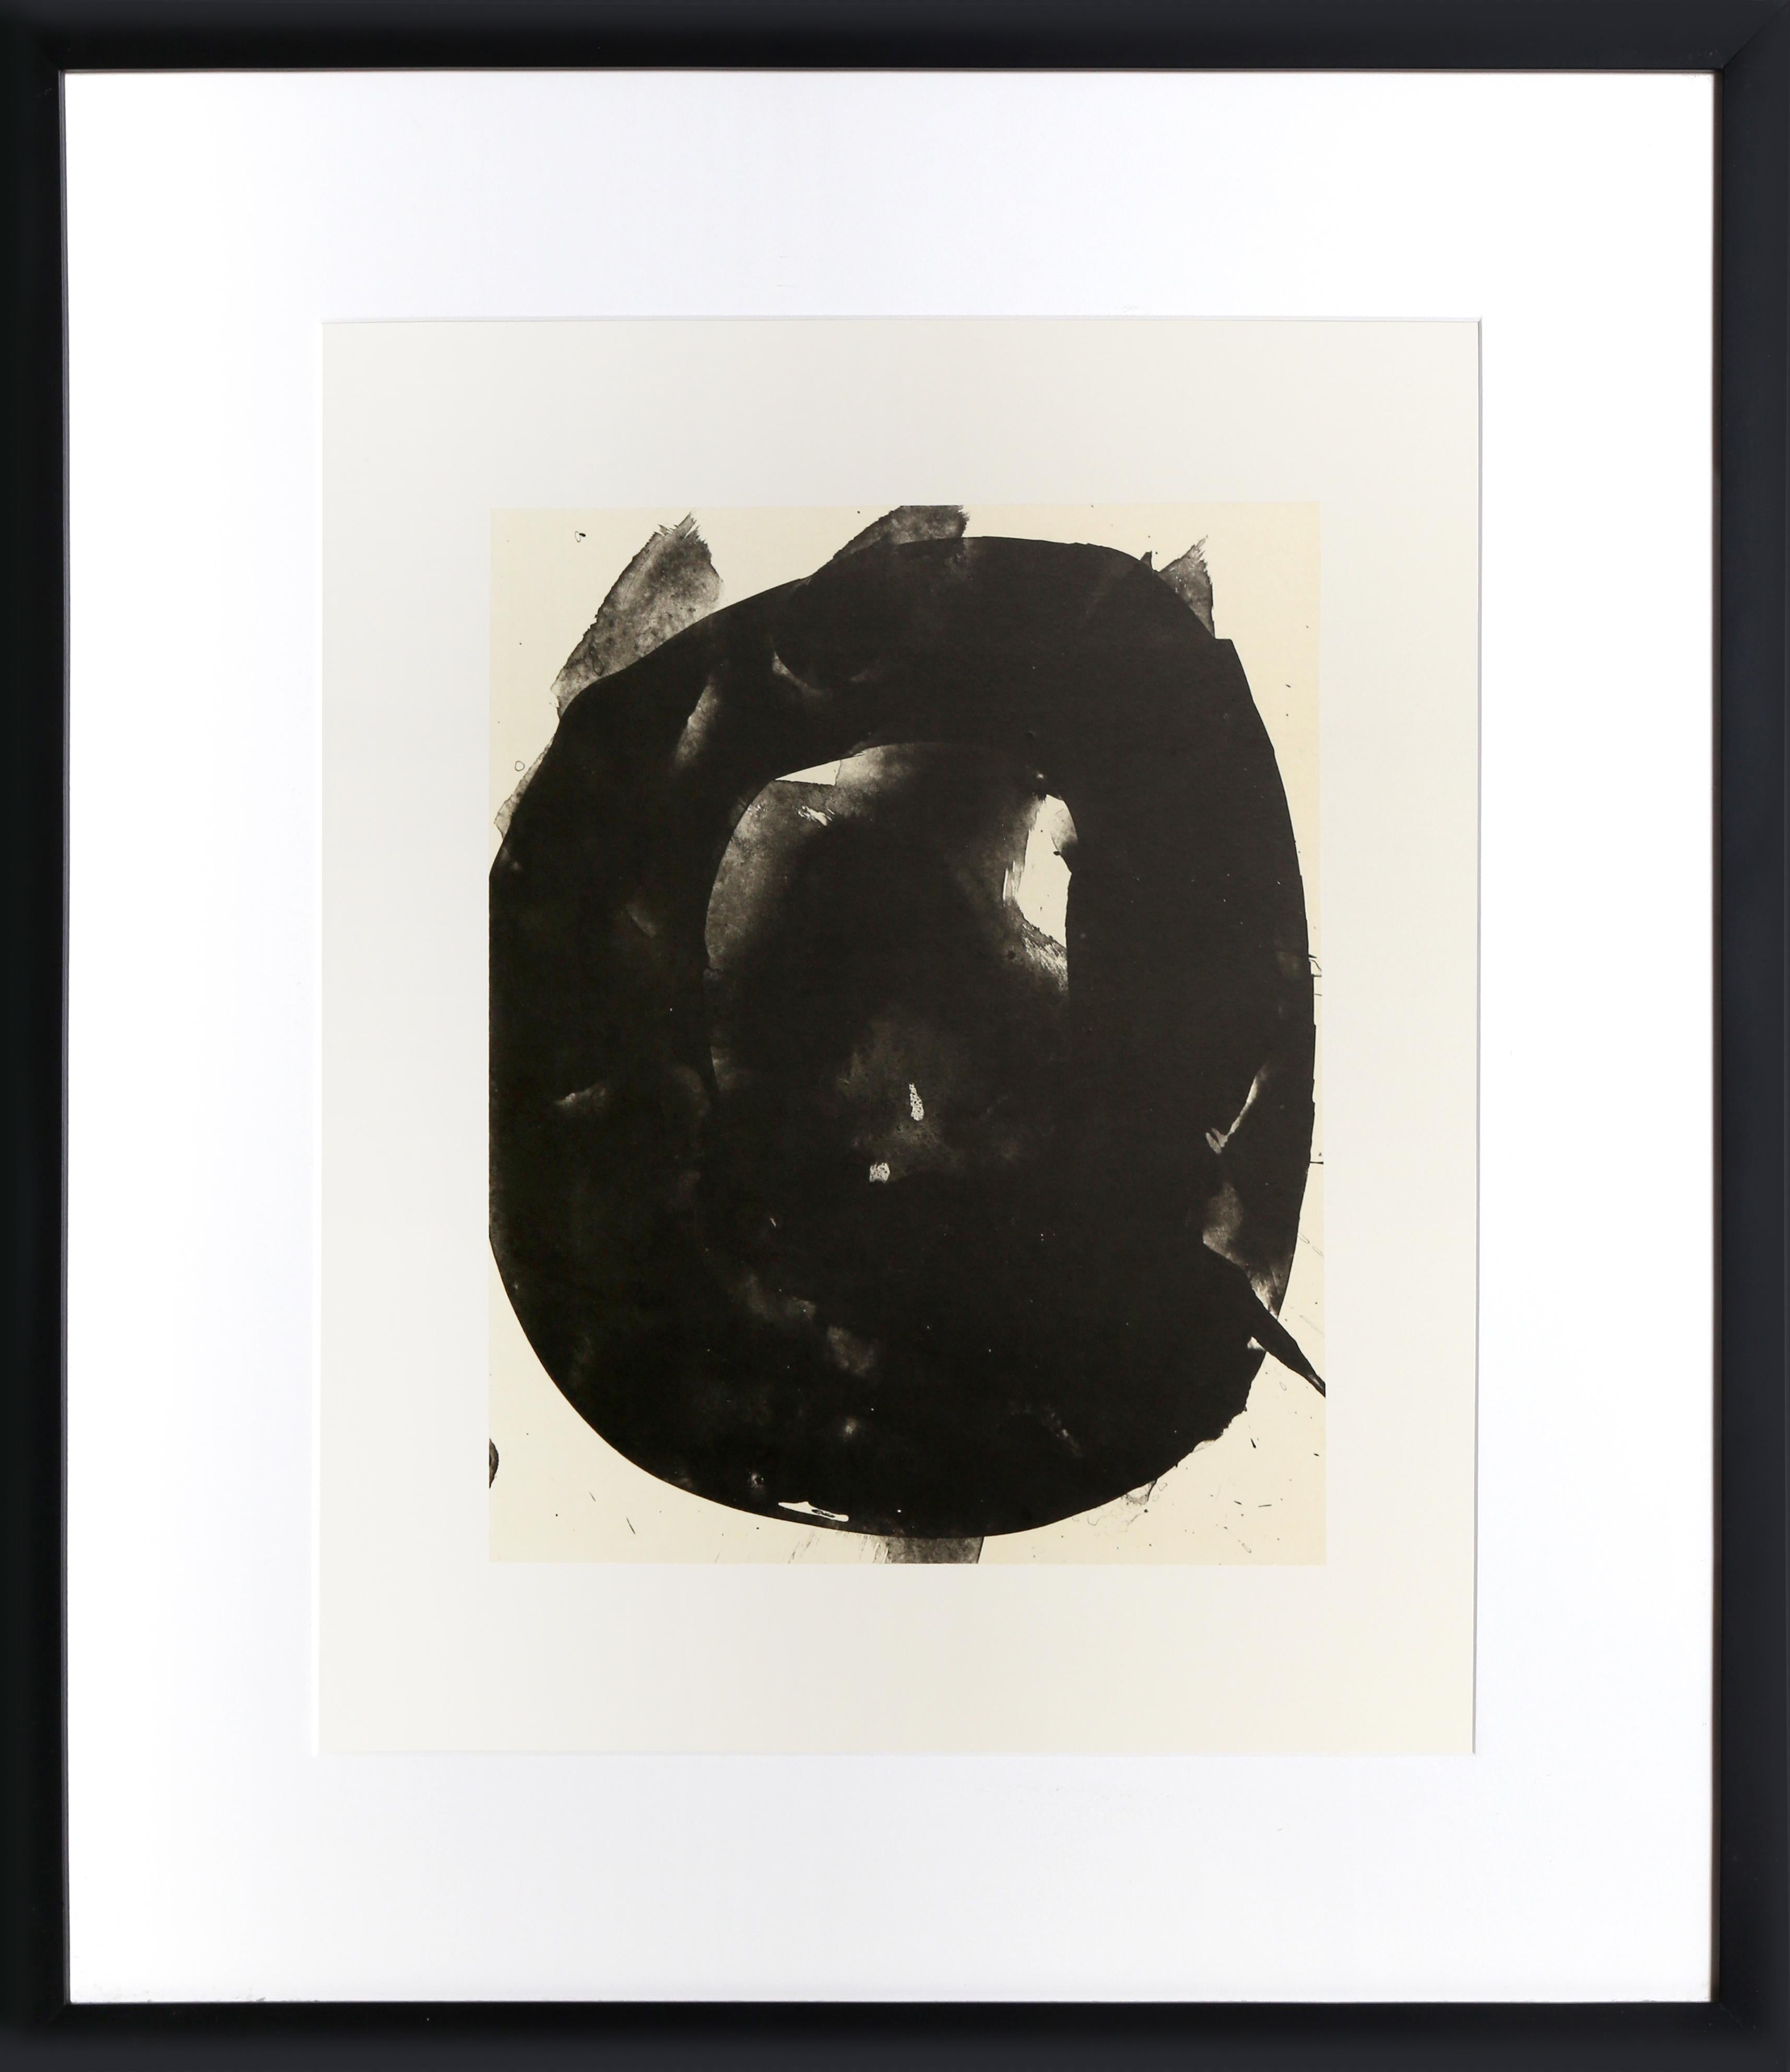 No. 6 from Three Poems, Abstract Lithograph by Robert Motherwell